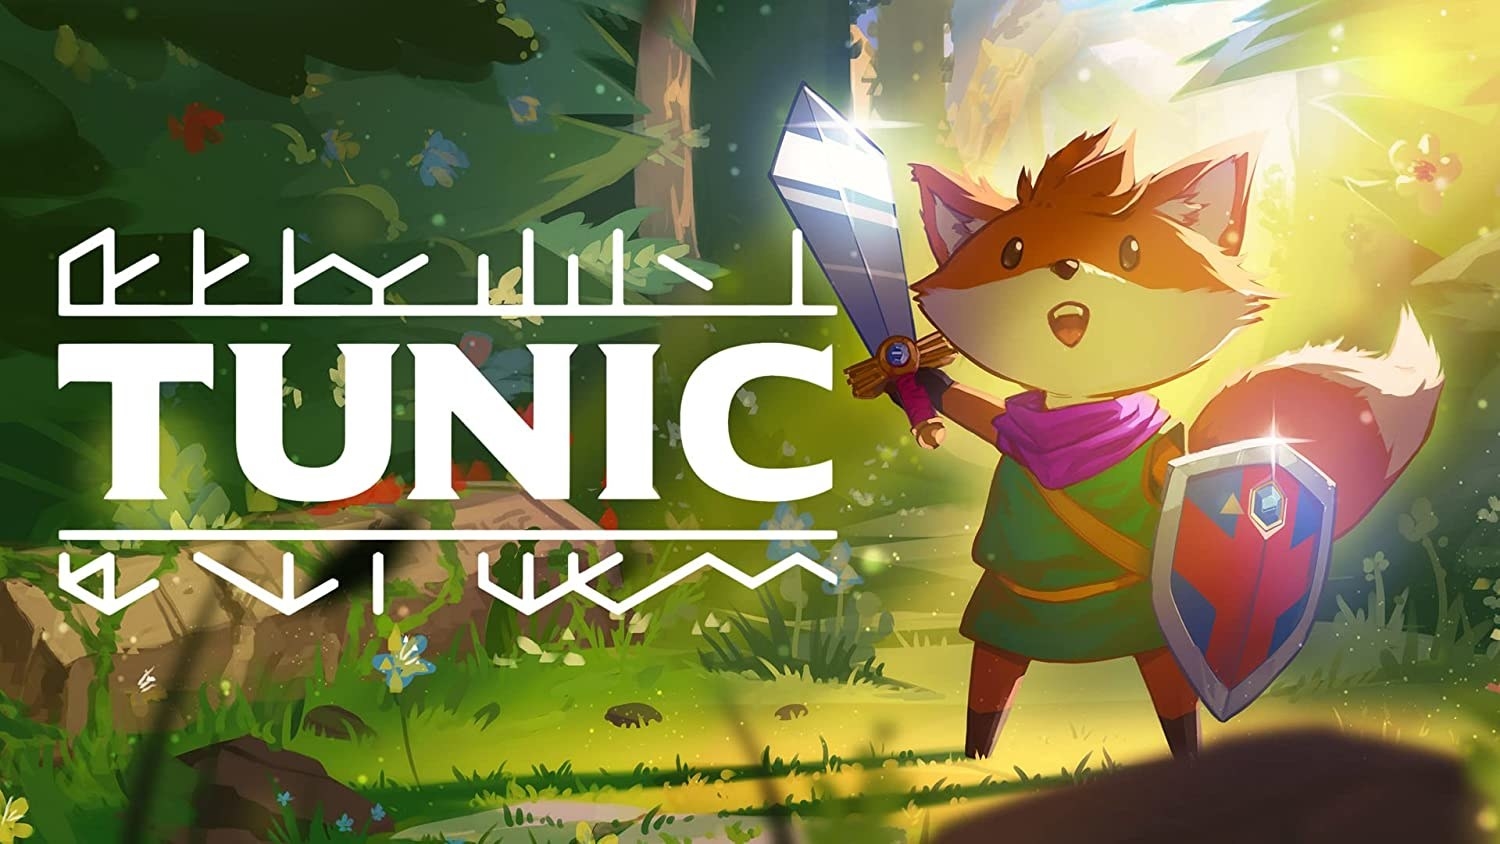 the game poster for Tunic featuring a fox character